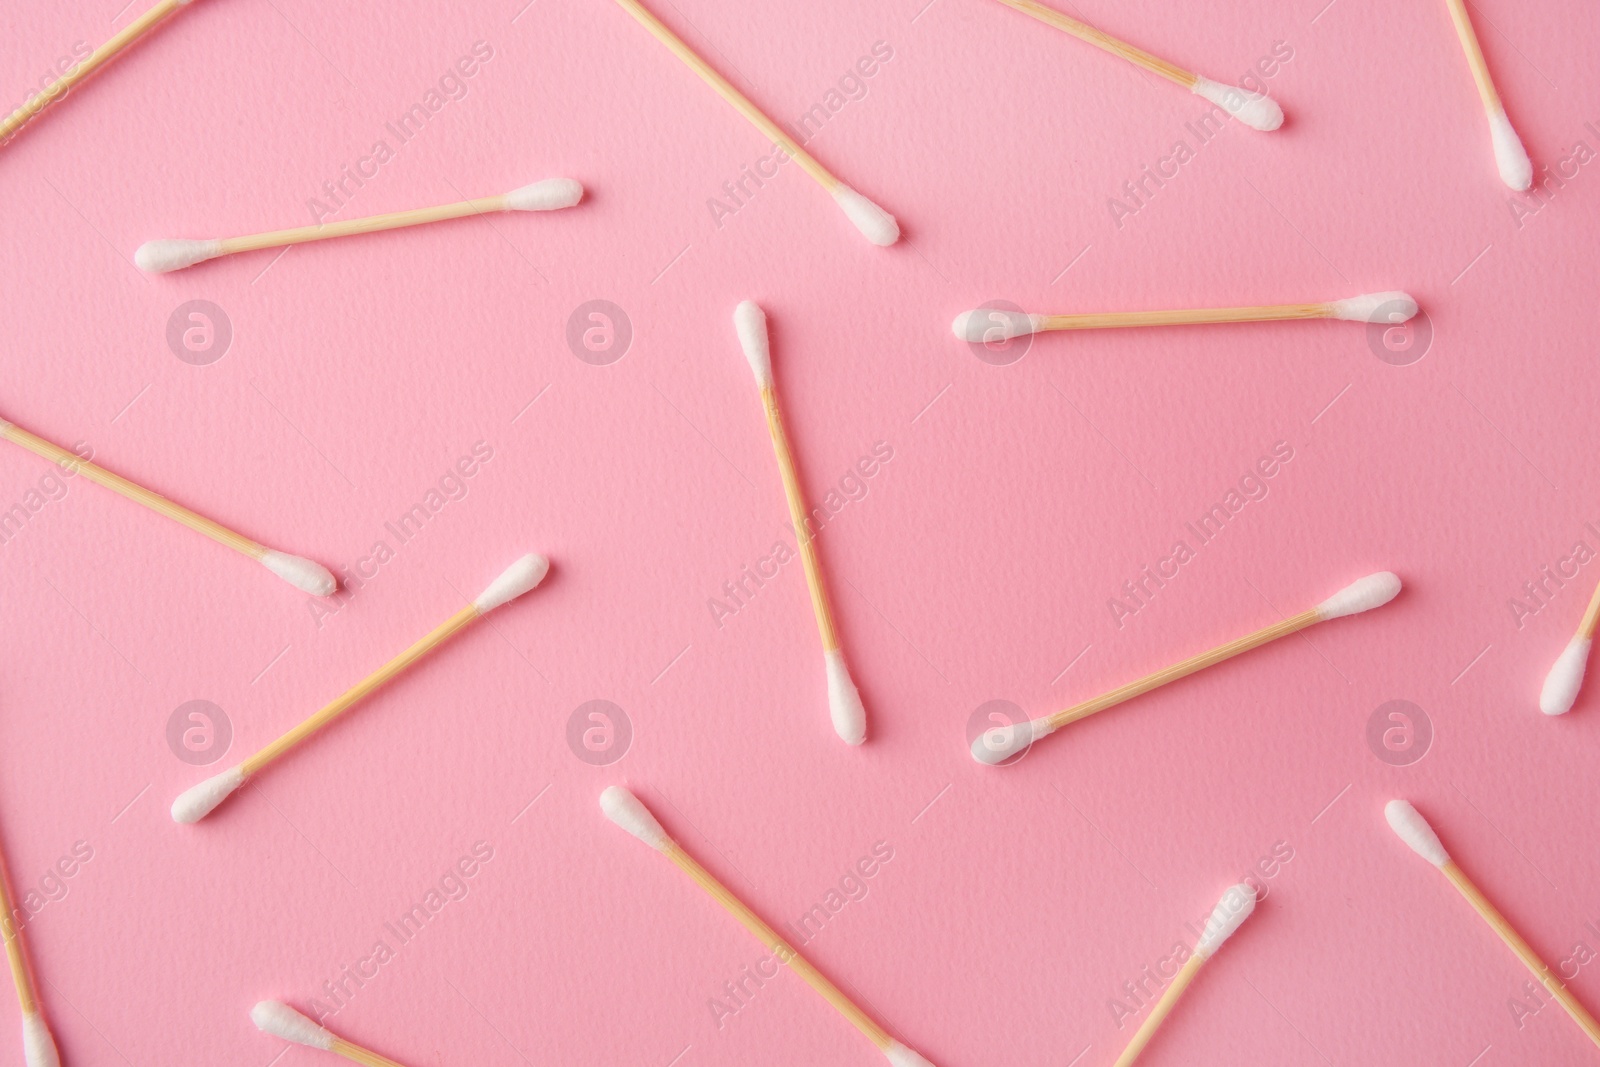 Photo of Many clean cotton buds on pink background, flat lay